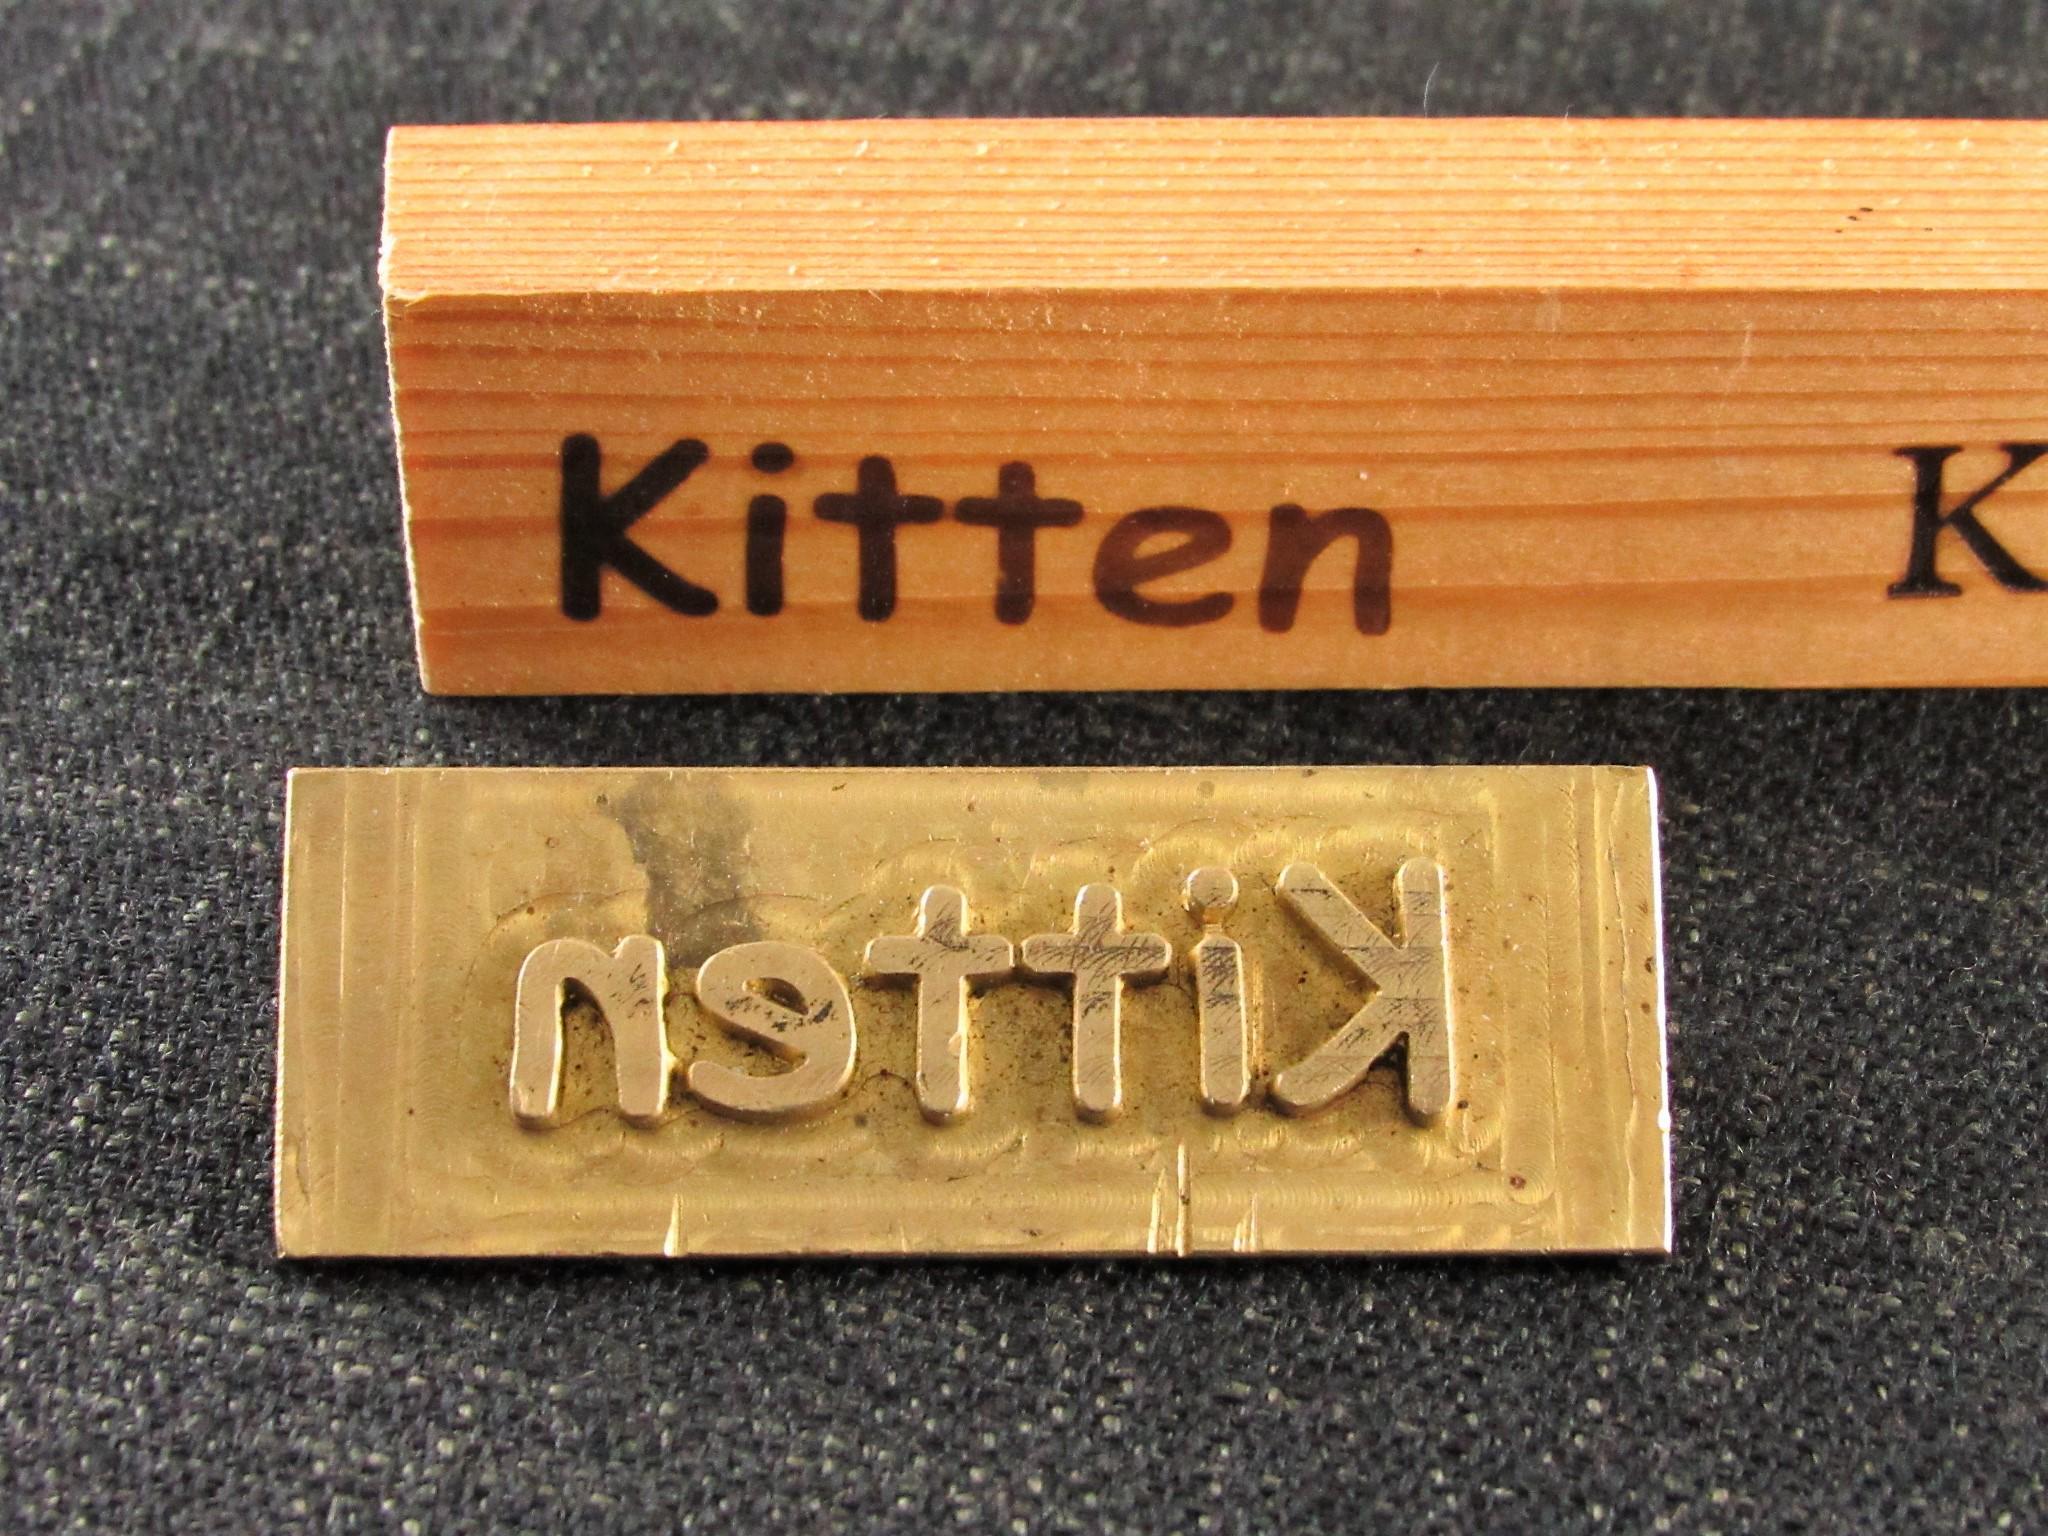 3 Brass Embossing Stamps from a Norfolk Shoe Factory - Kitten - KIKI - Pure